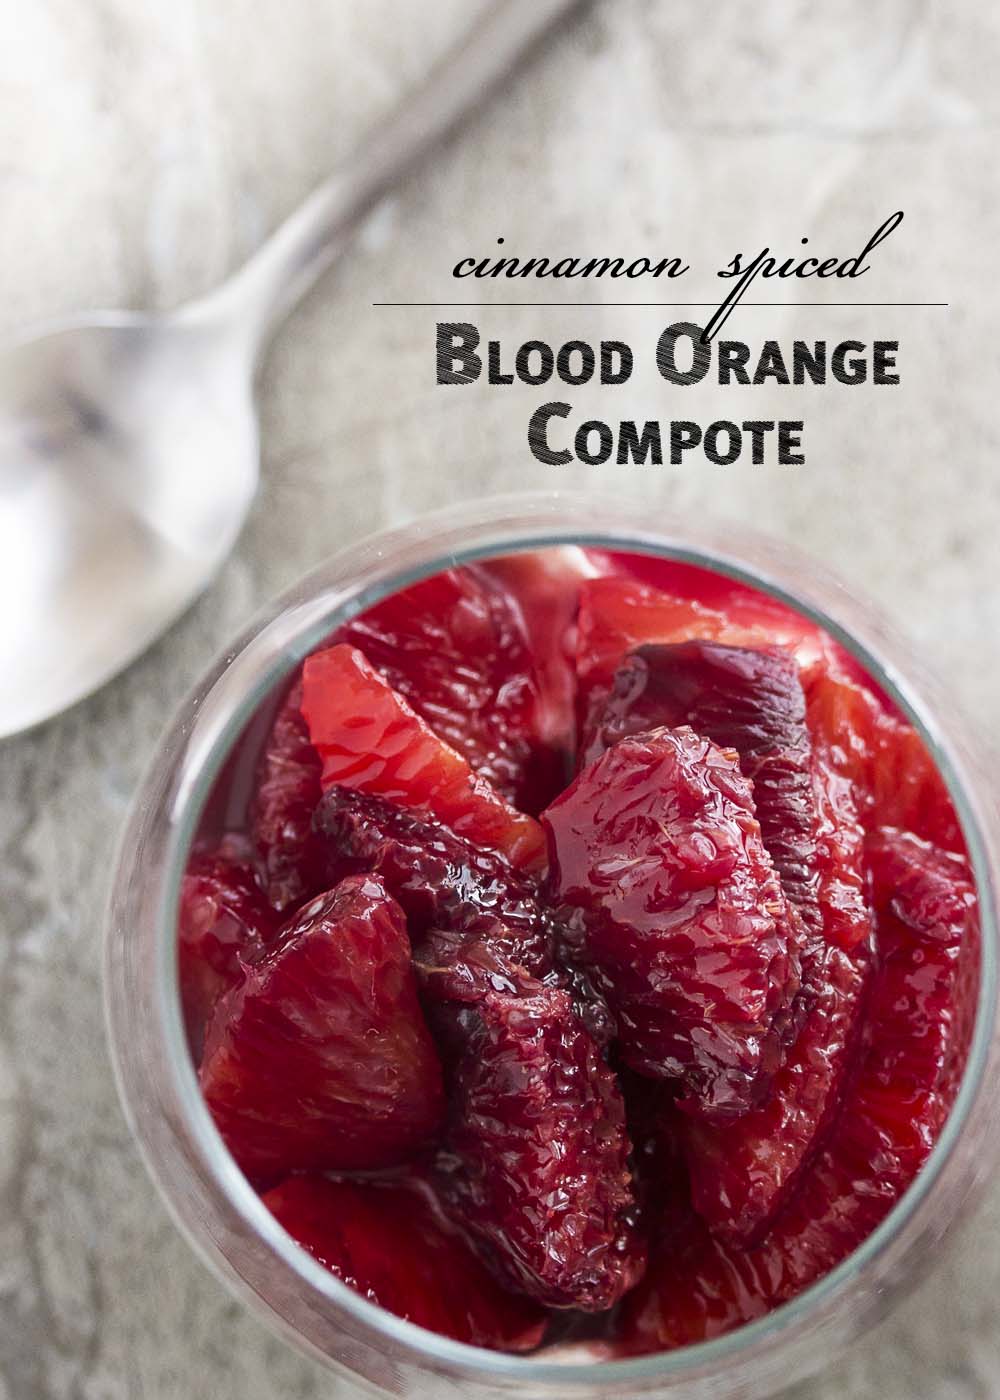 Ruby red and cinnamon spiced, this blood orange compote is a beautiful and intensely flavored sauce perfect for spooning over creamy mascarpone mousse. | justalittlebitofbacon.com